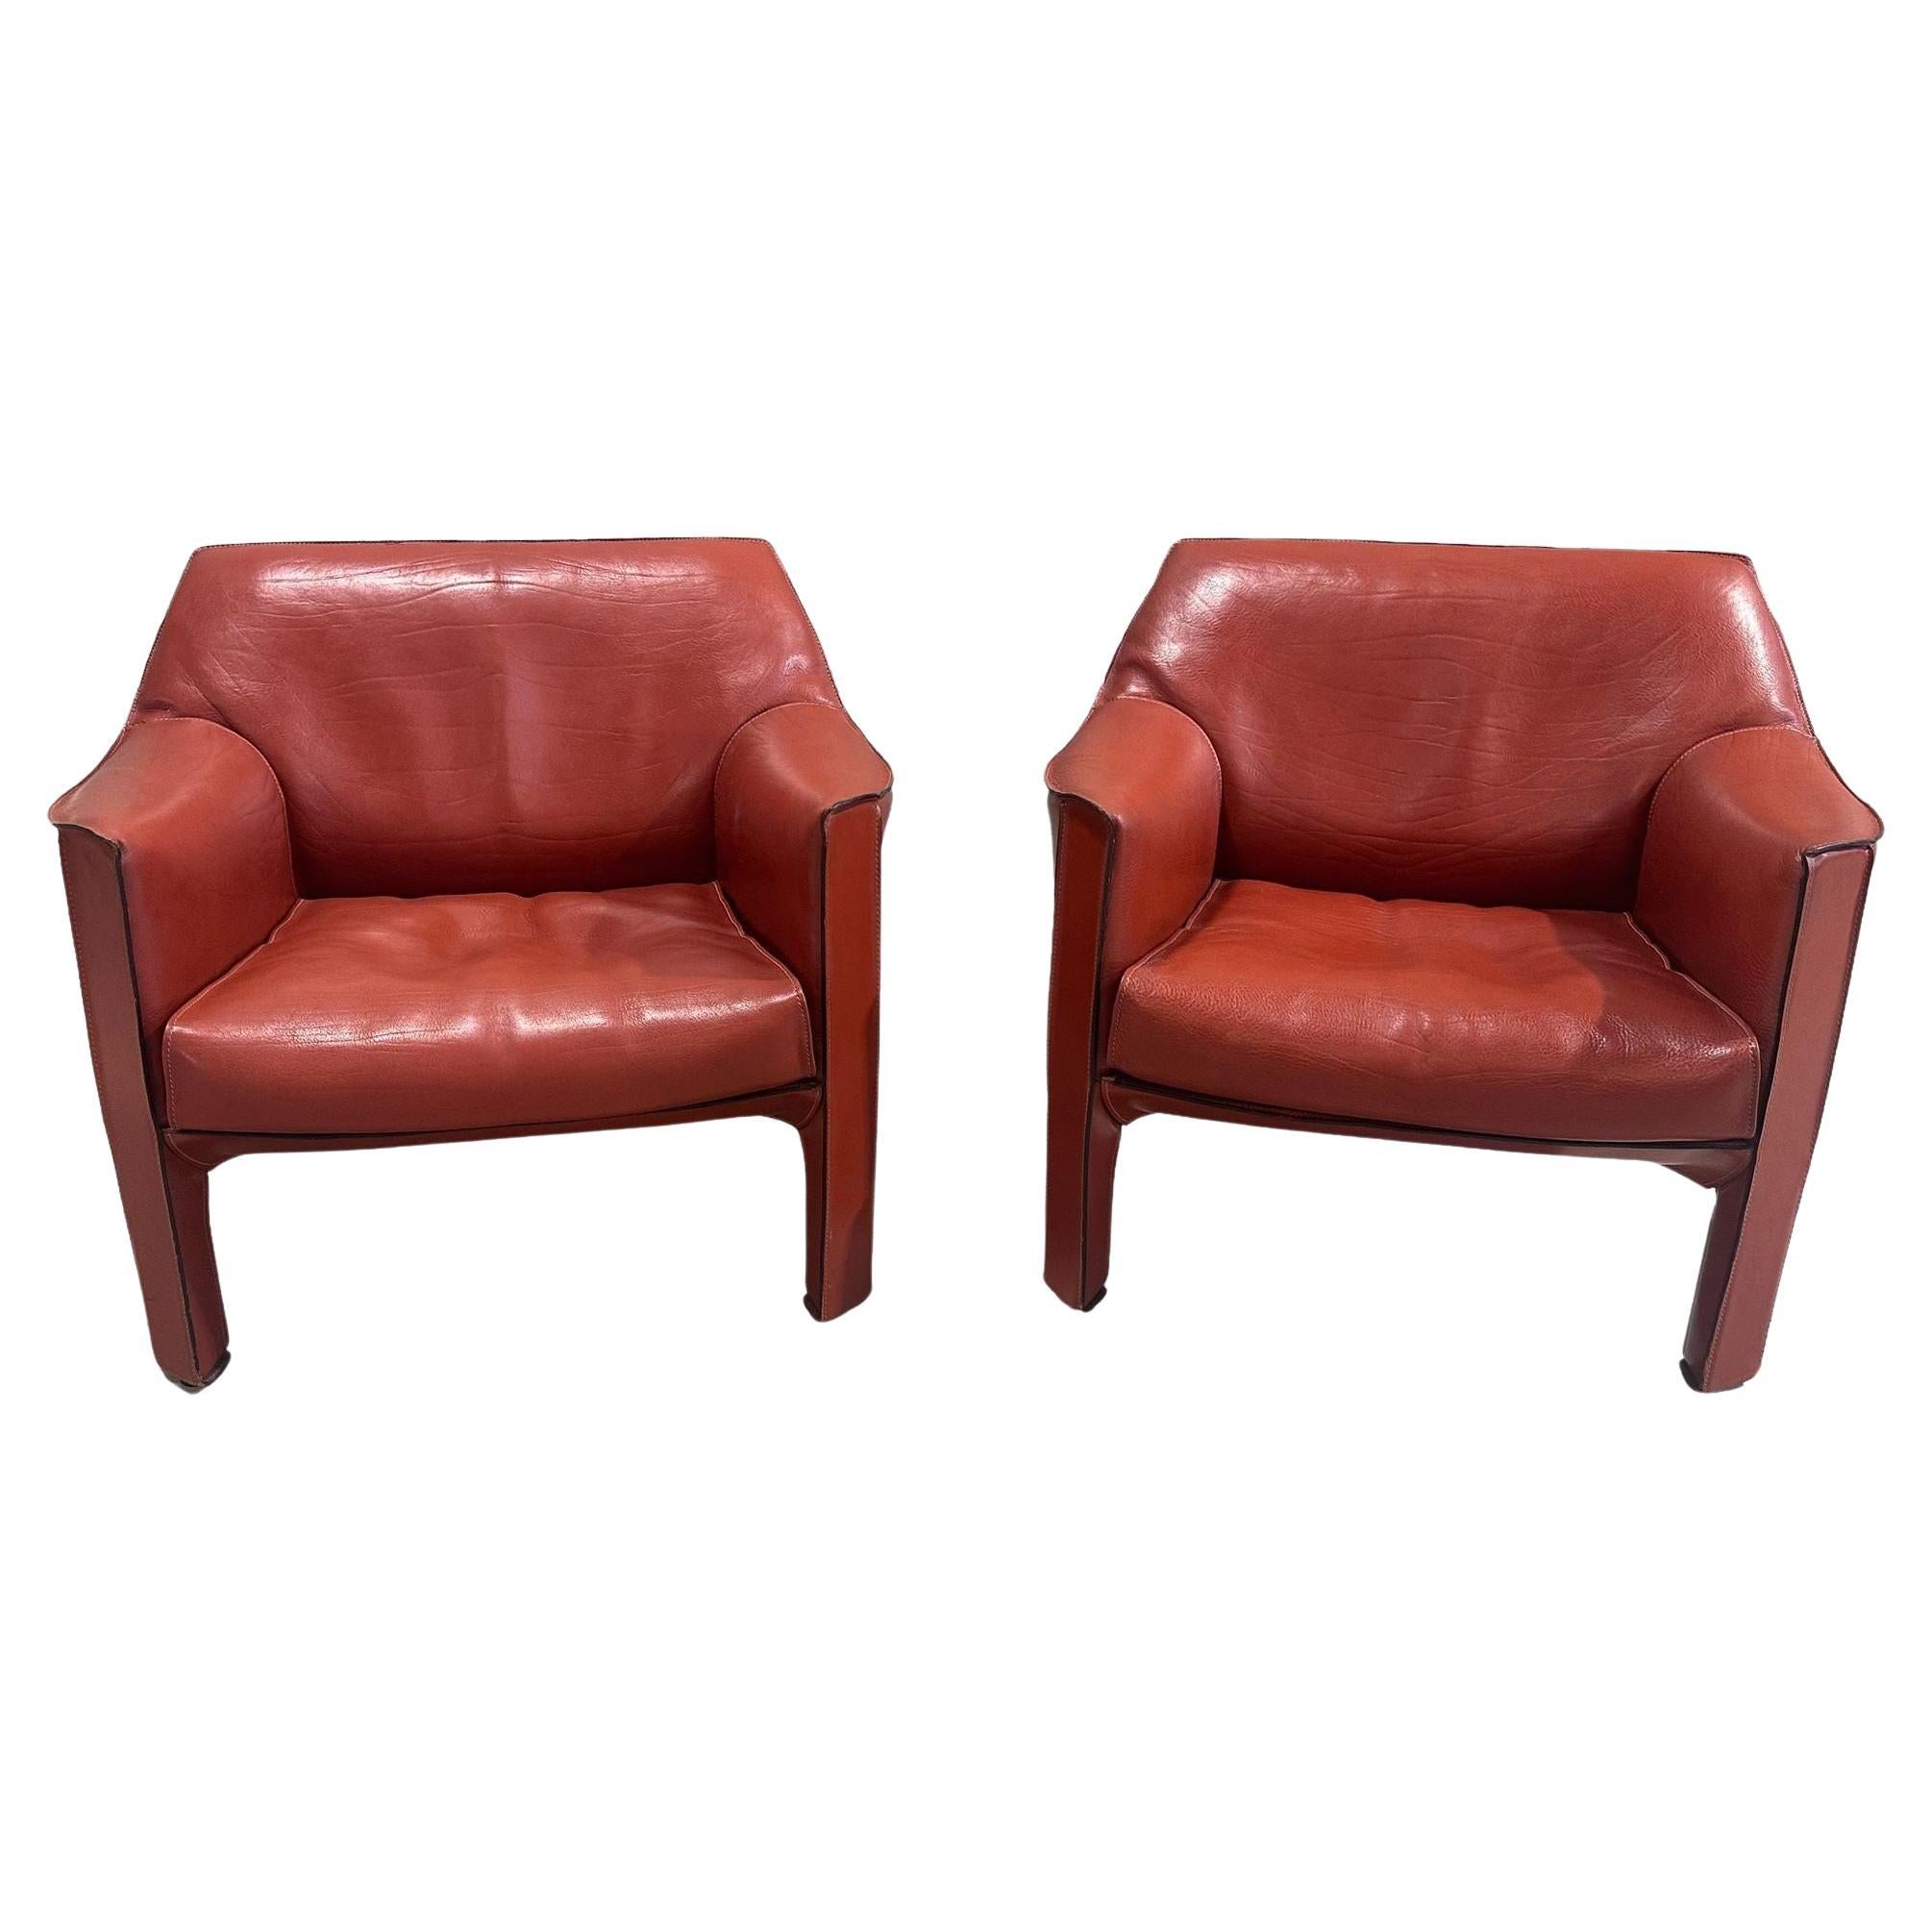 Mario Bellini Pair Leather Cab Lounge Chairs, Model 415, Italy 1970 For Sale